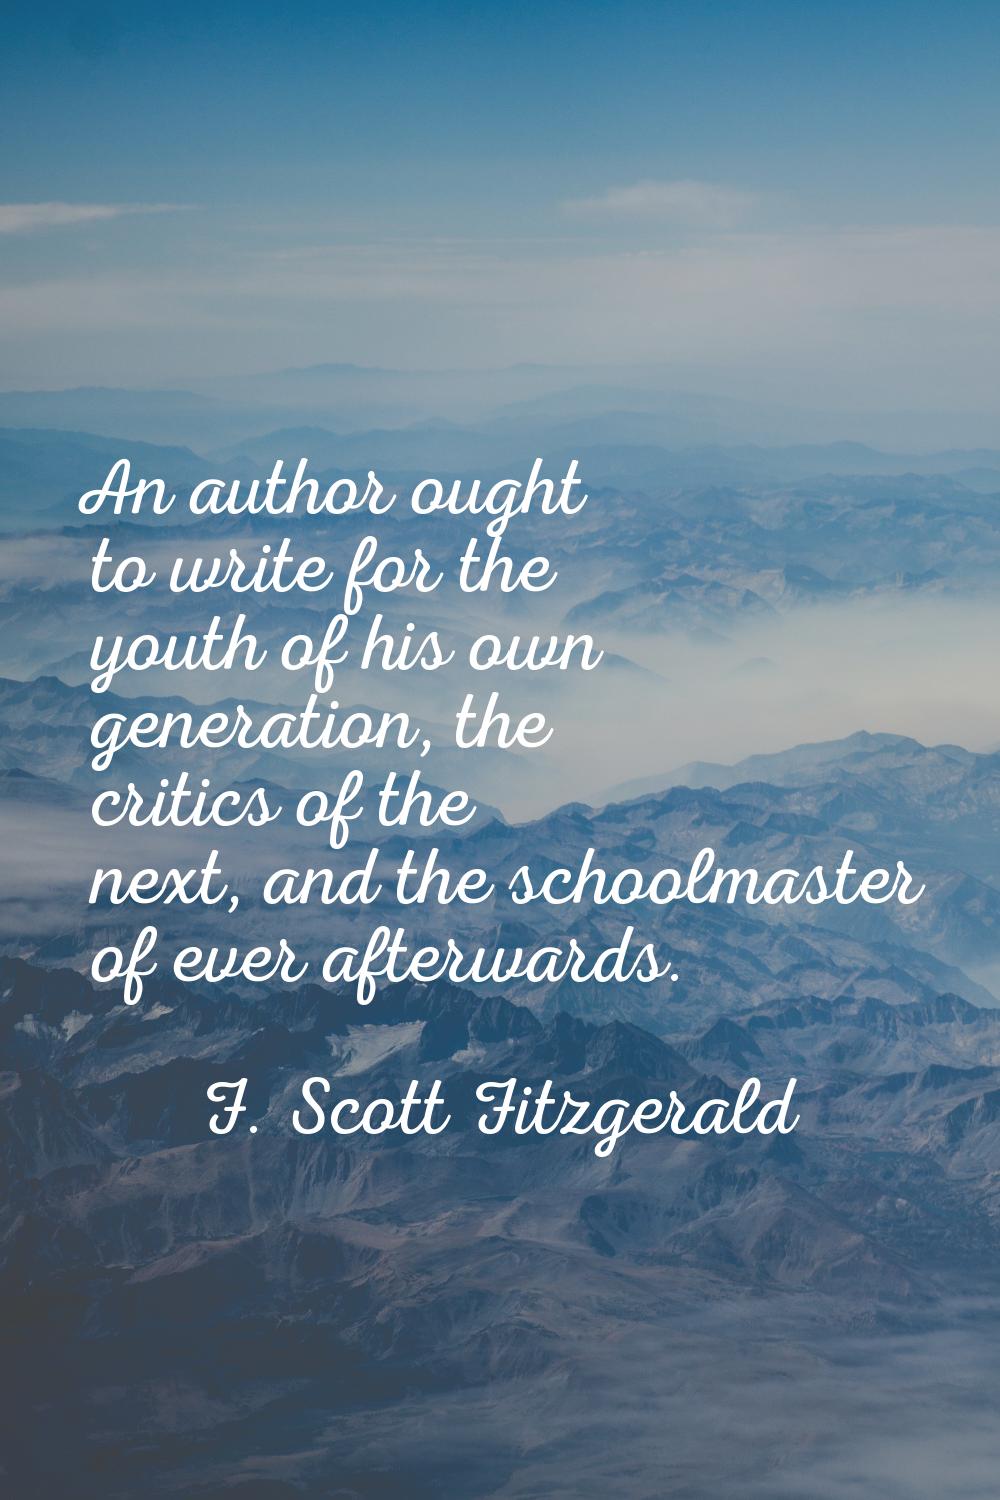 An author ought to write for the youth of his own generation, the critics of the next, and the scho